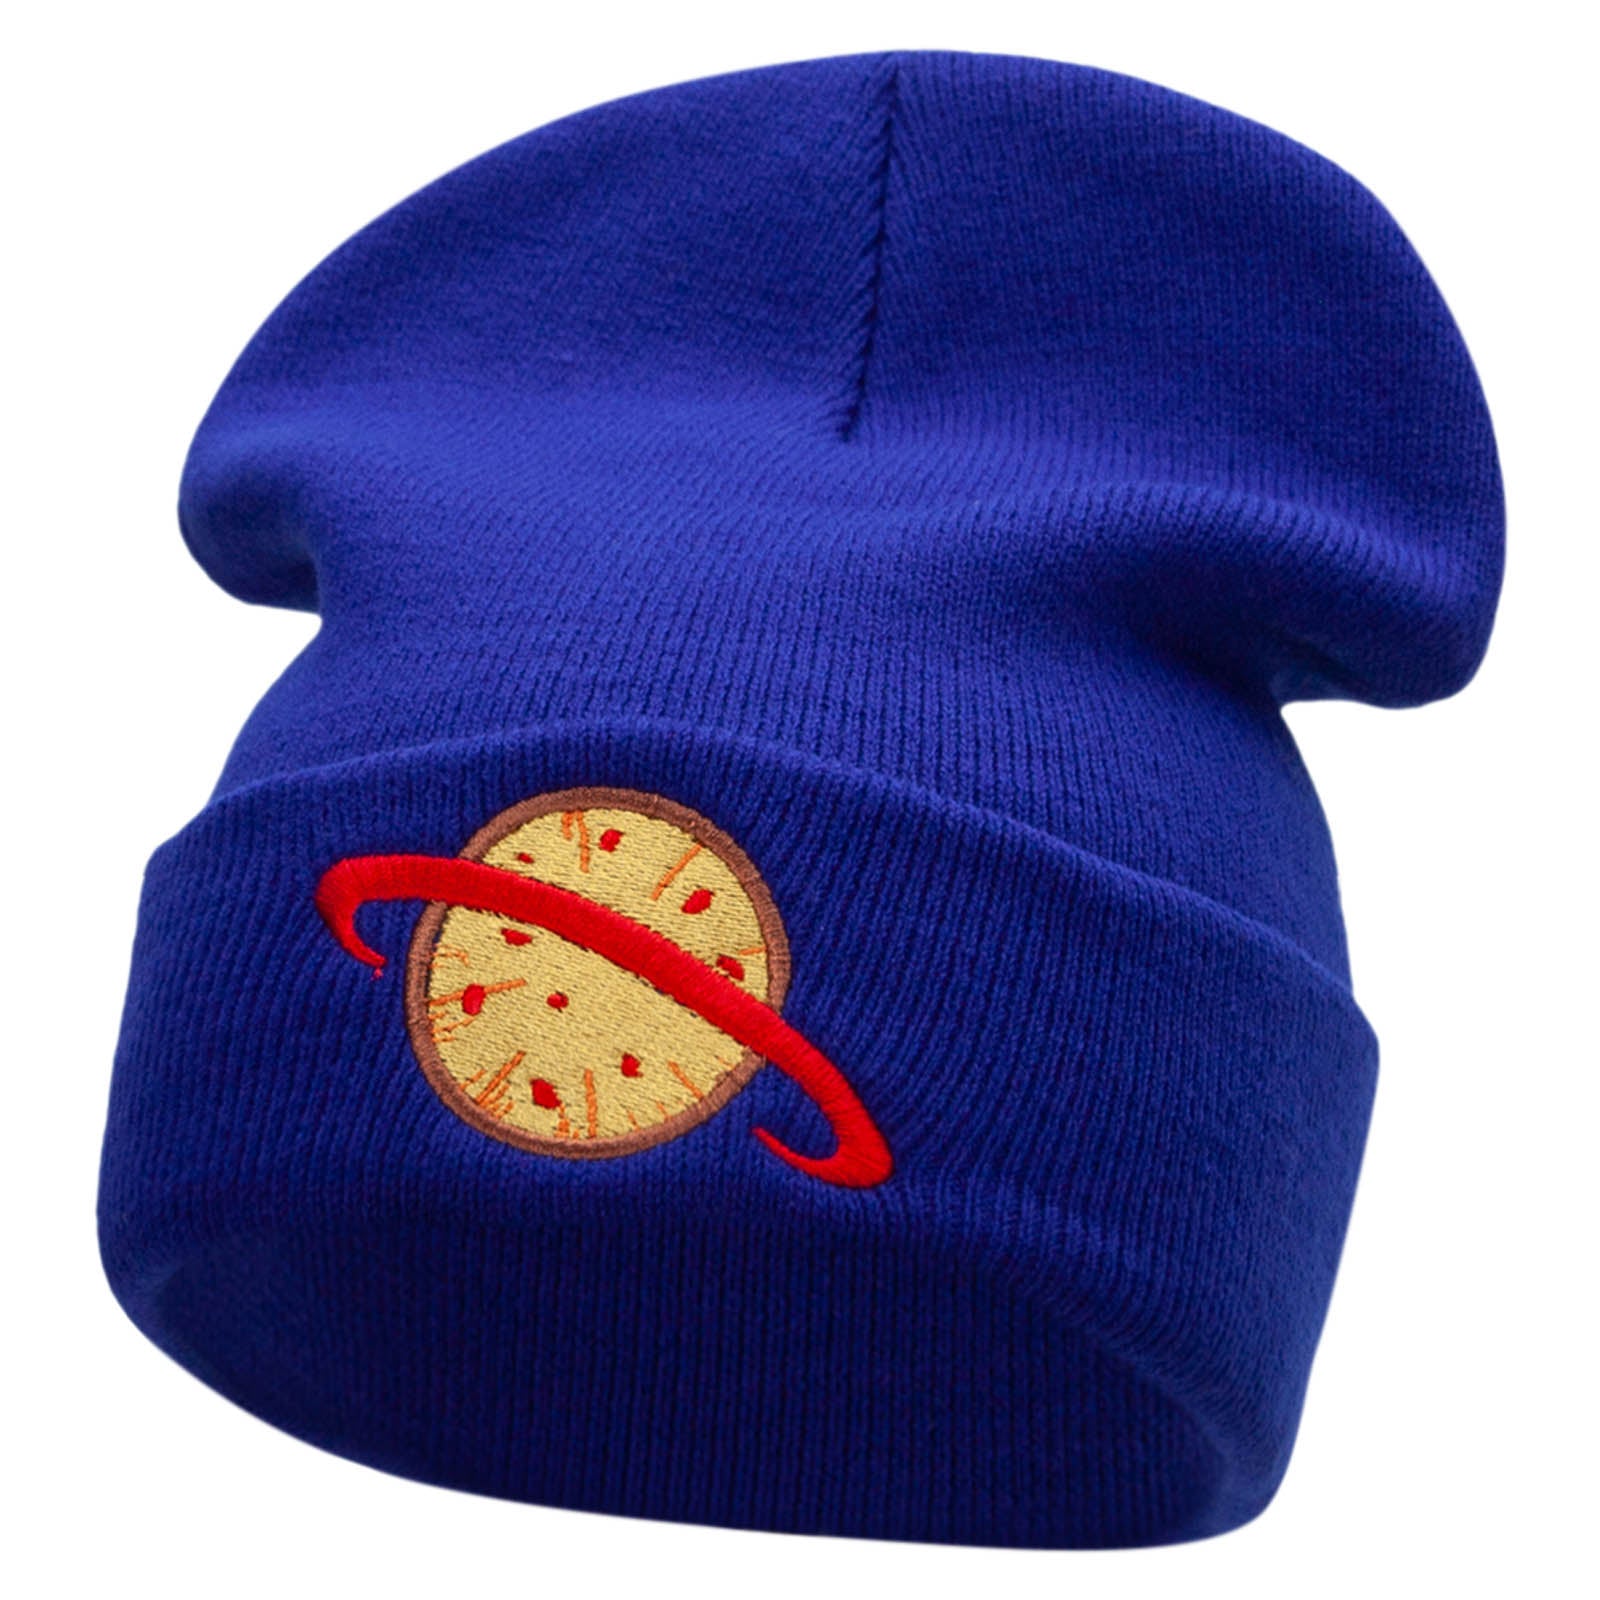 Planet Pizza Embroidered 12 Inch Long Knitted Beanie - Royal OSFM